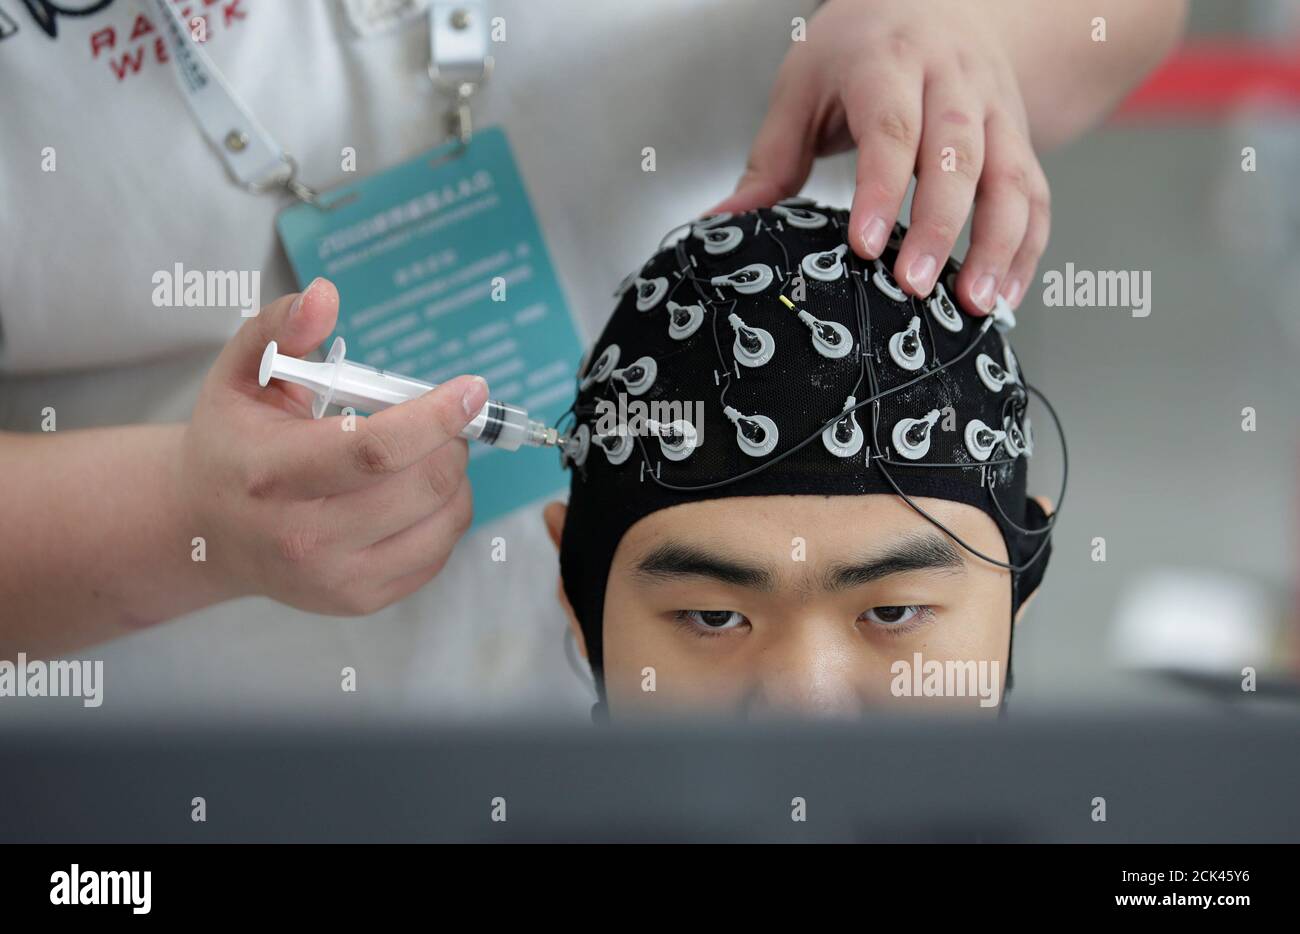 A staff member puts contact gel on the cap of a competitor during a Brain-Computer  Interface (BCI) controlled robot contest at the World Robot Conference  (WRC) in Beijing, China August 17, 2018.